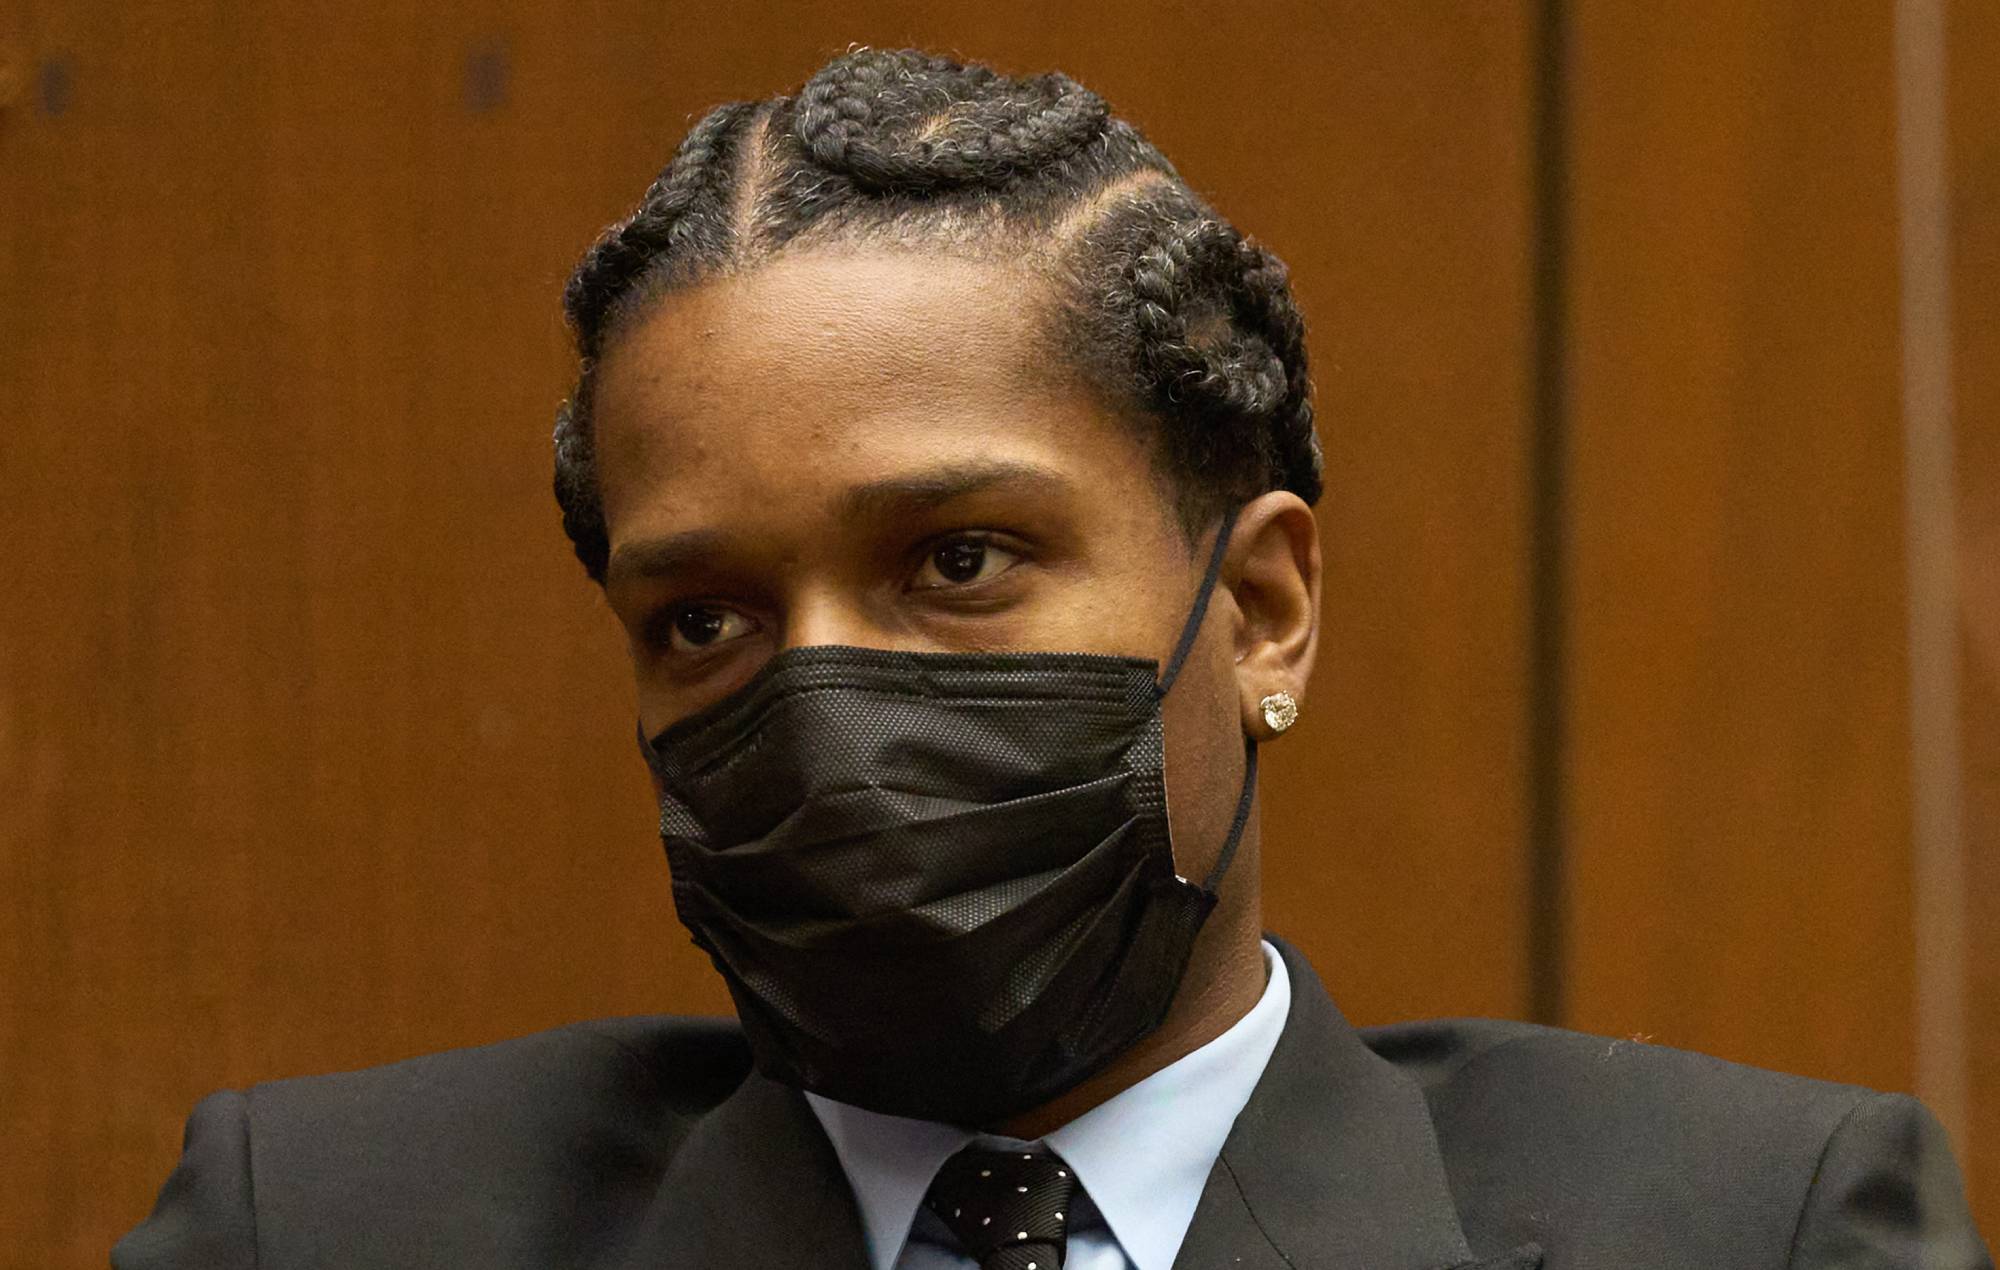 A$AP Rocky must stand trial on charges of firing gun at former friend